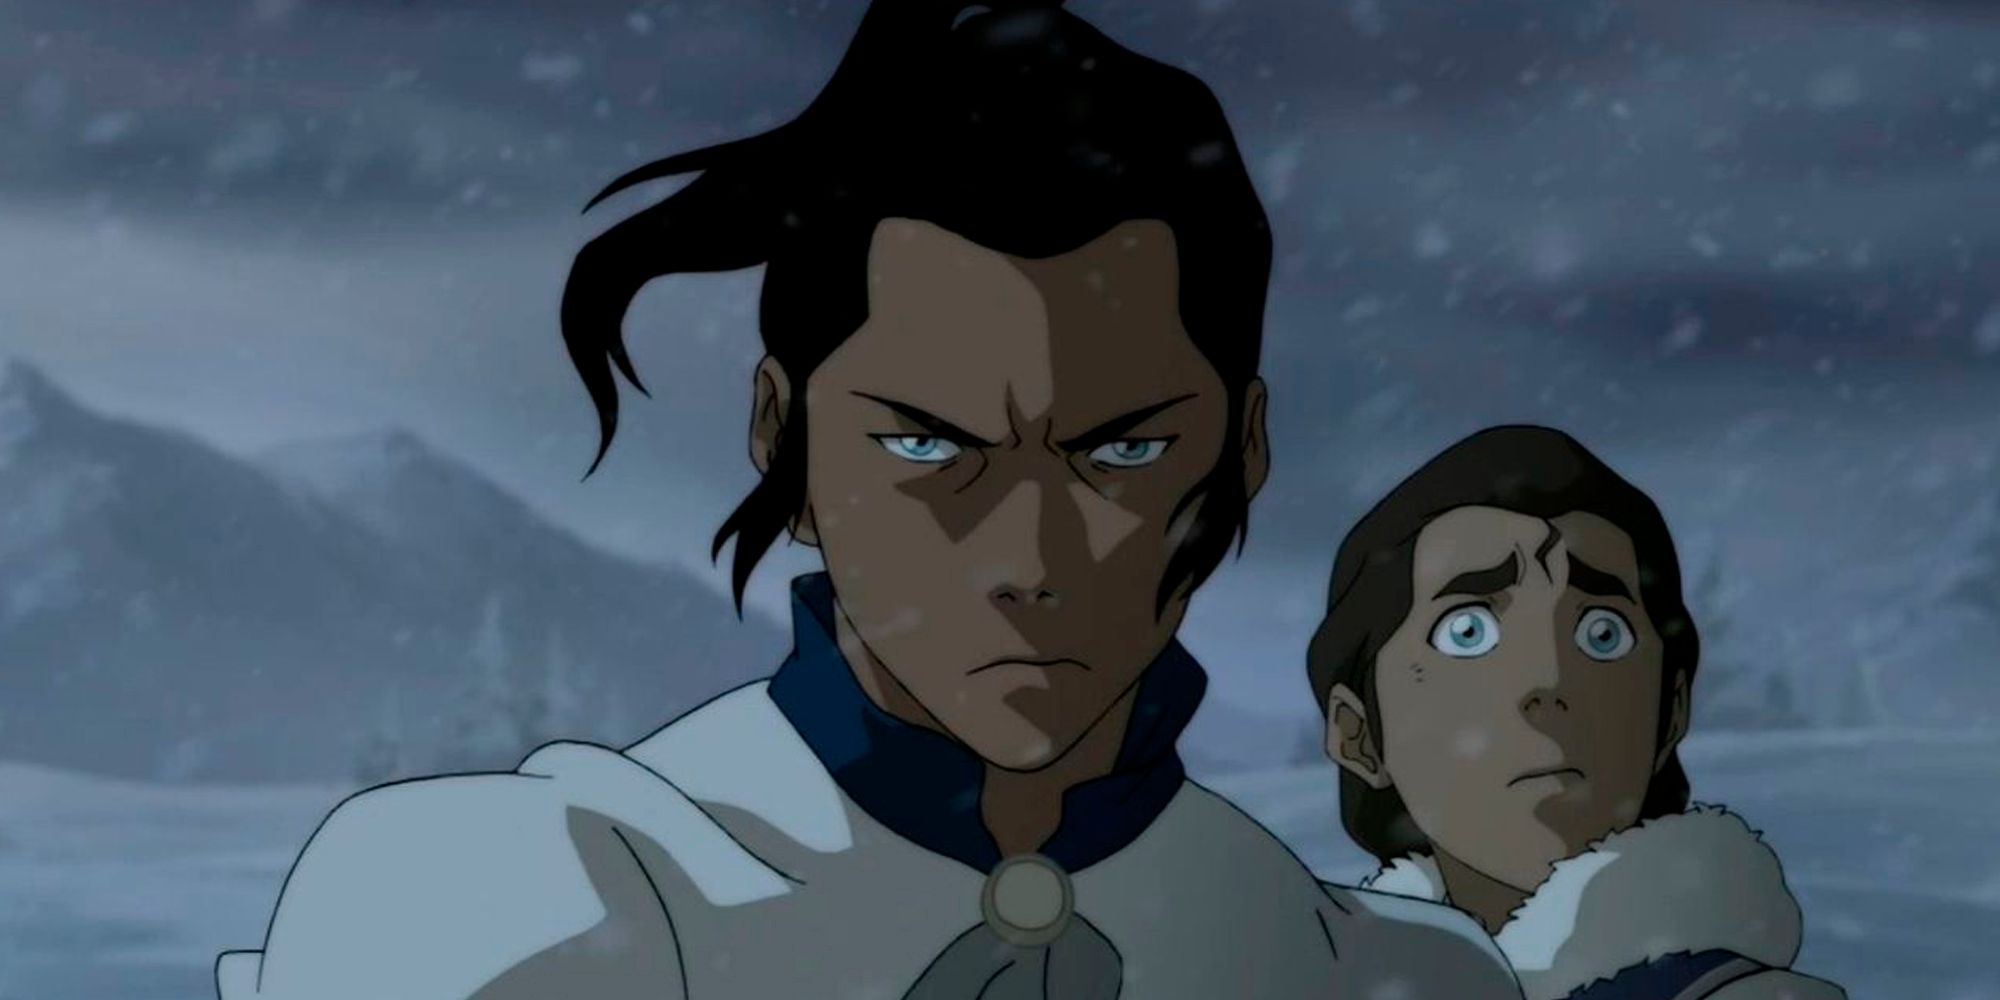 Amon True Origins are revealed at the of season 1 of The Legend of Korra